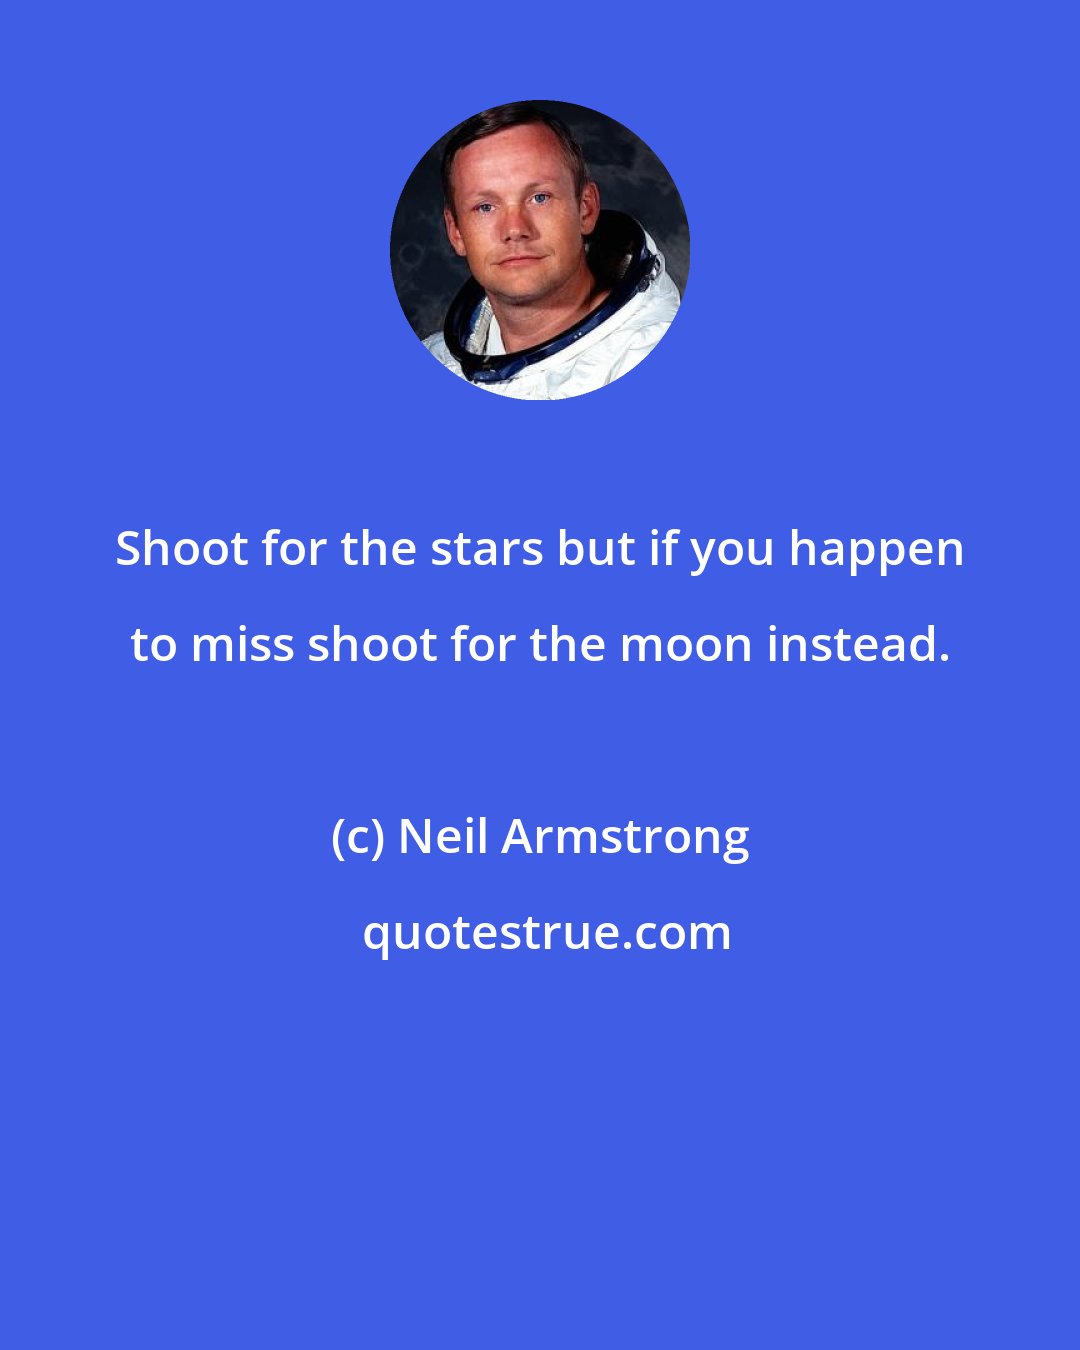 Neil Armstrong: Shoot for the stars but if you happen to miss shoot for the moon instead.